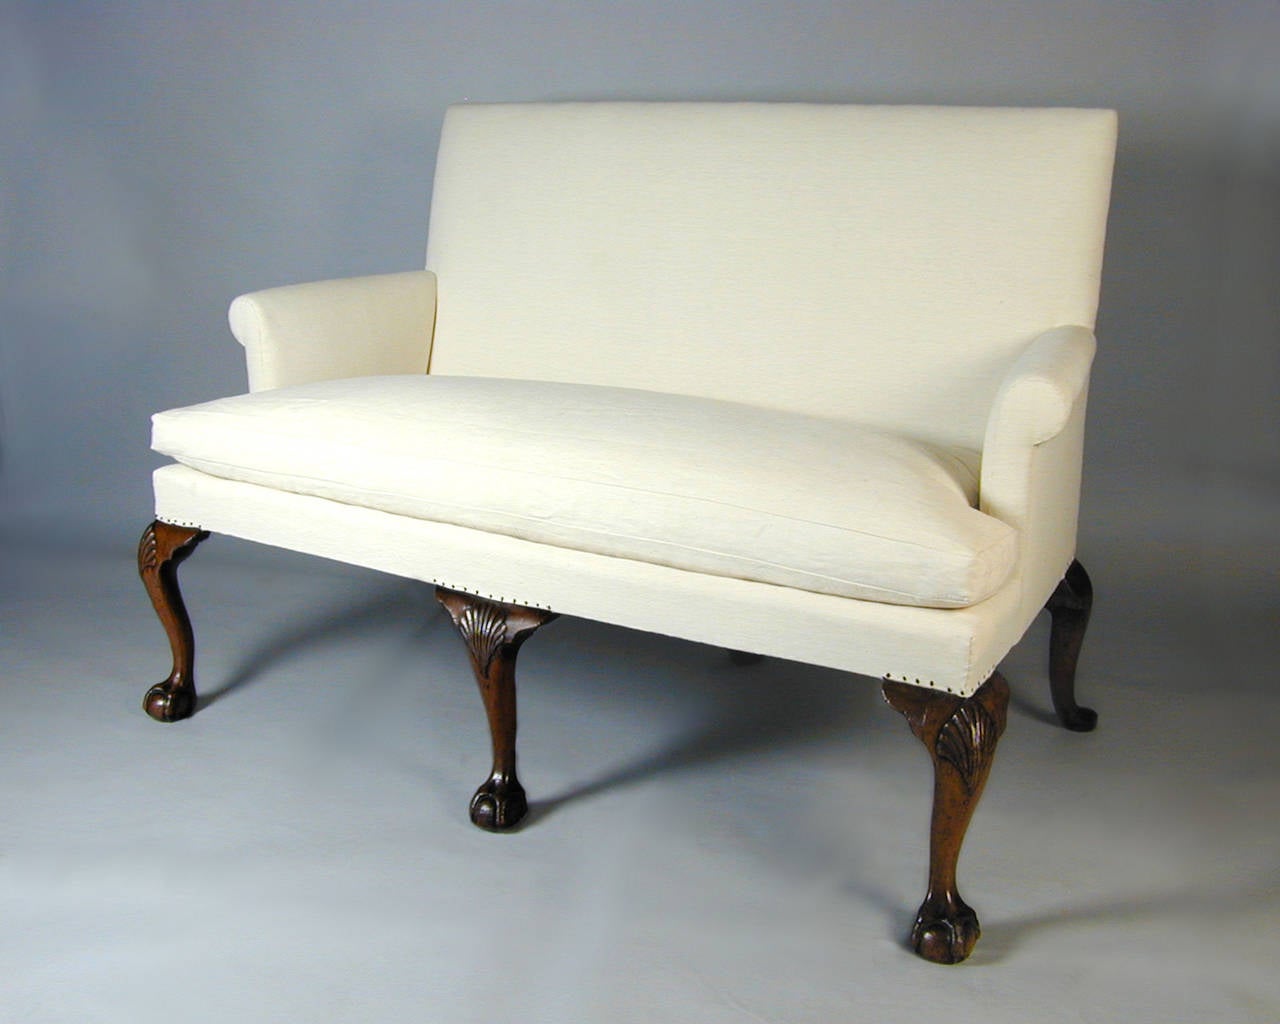 George II period walnut settee with shell-carved cabriole legs and claw and ball feet.